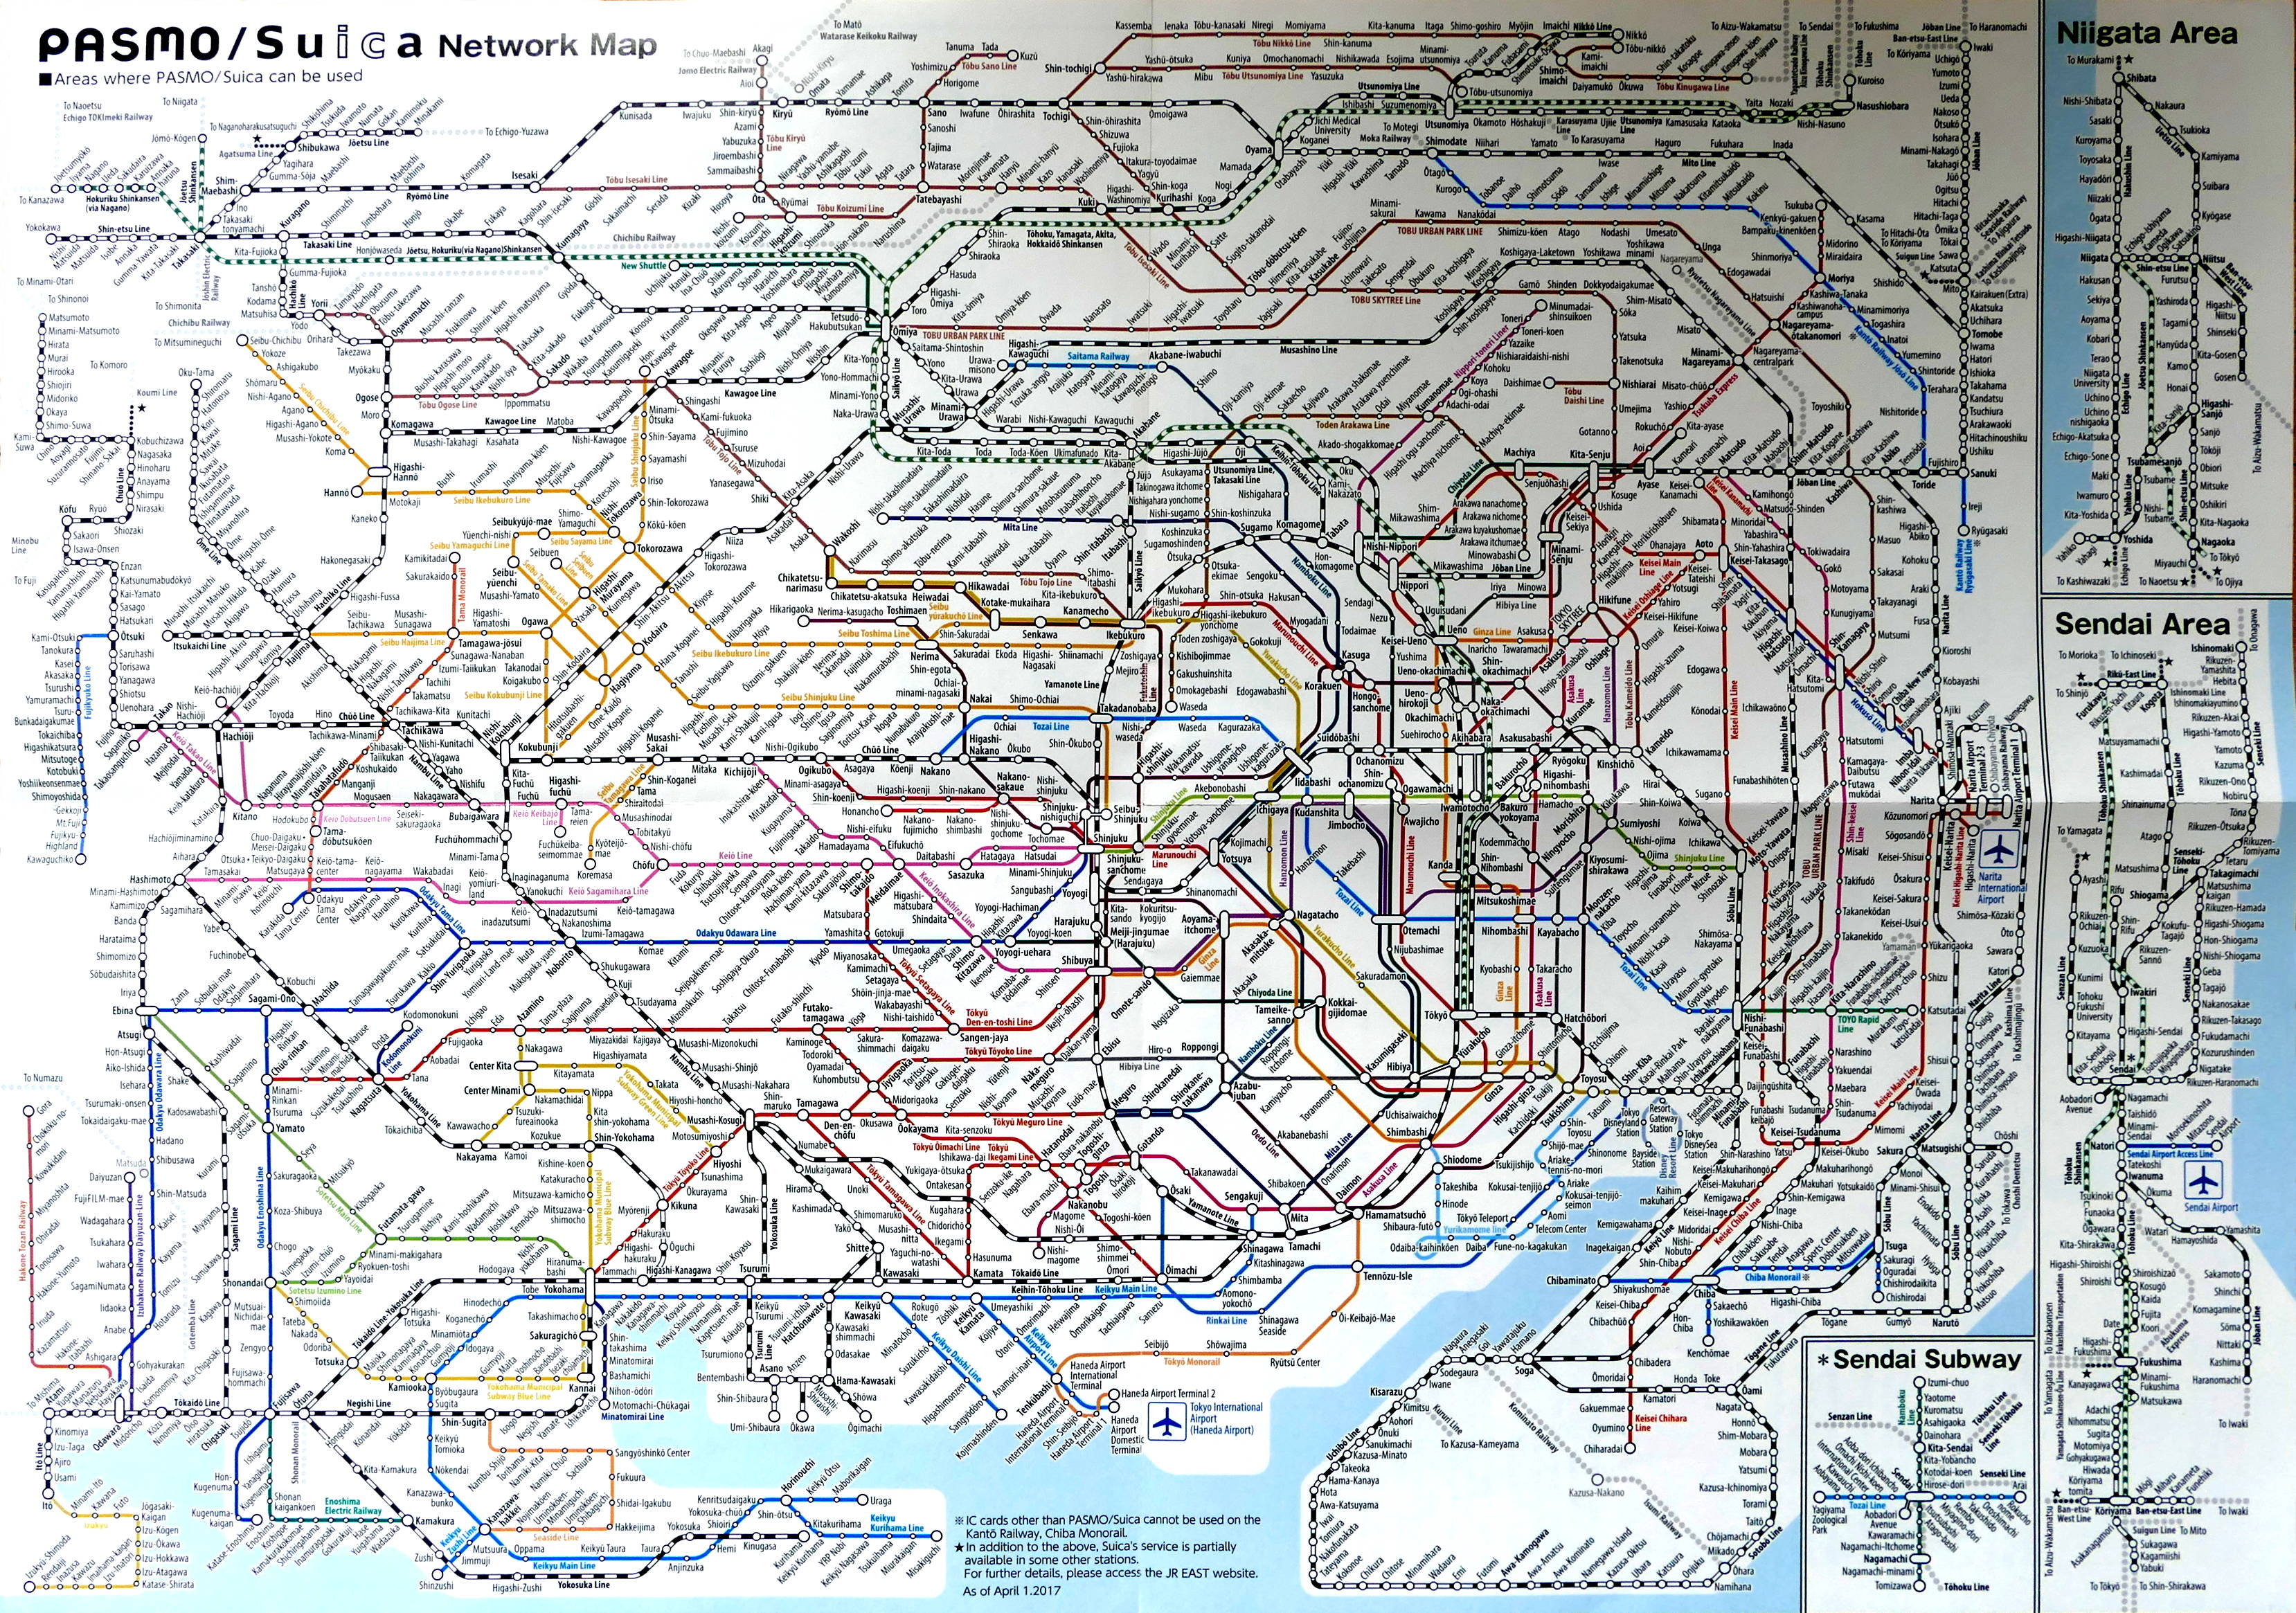 the Tokyo subway and commuter rail map (extremely complex)